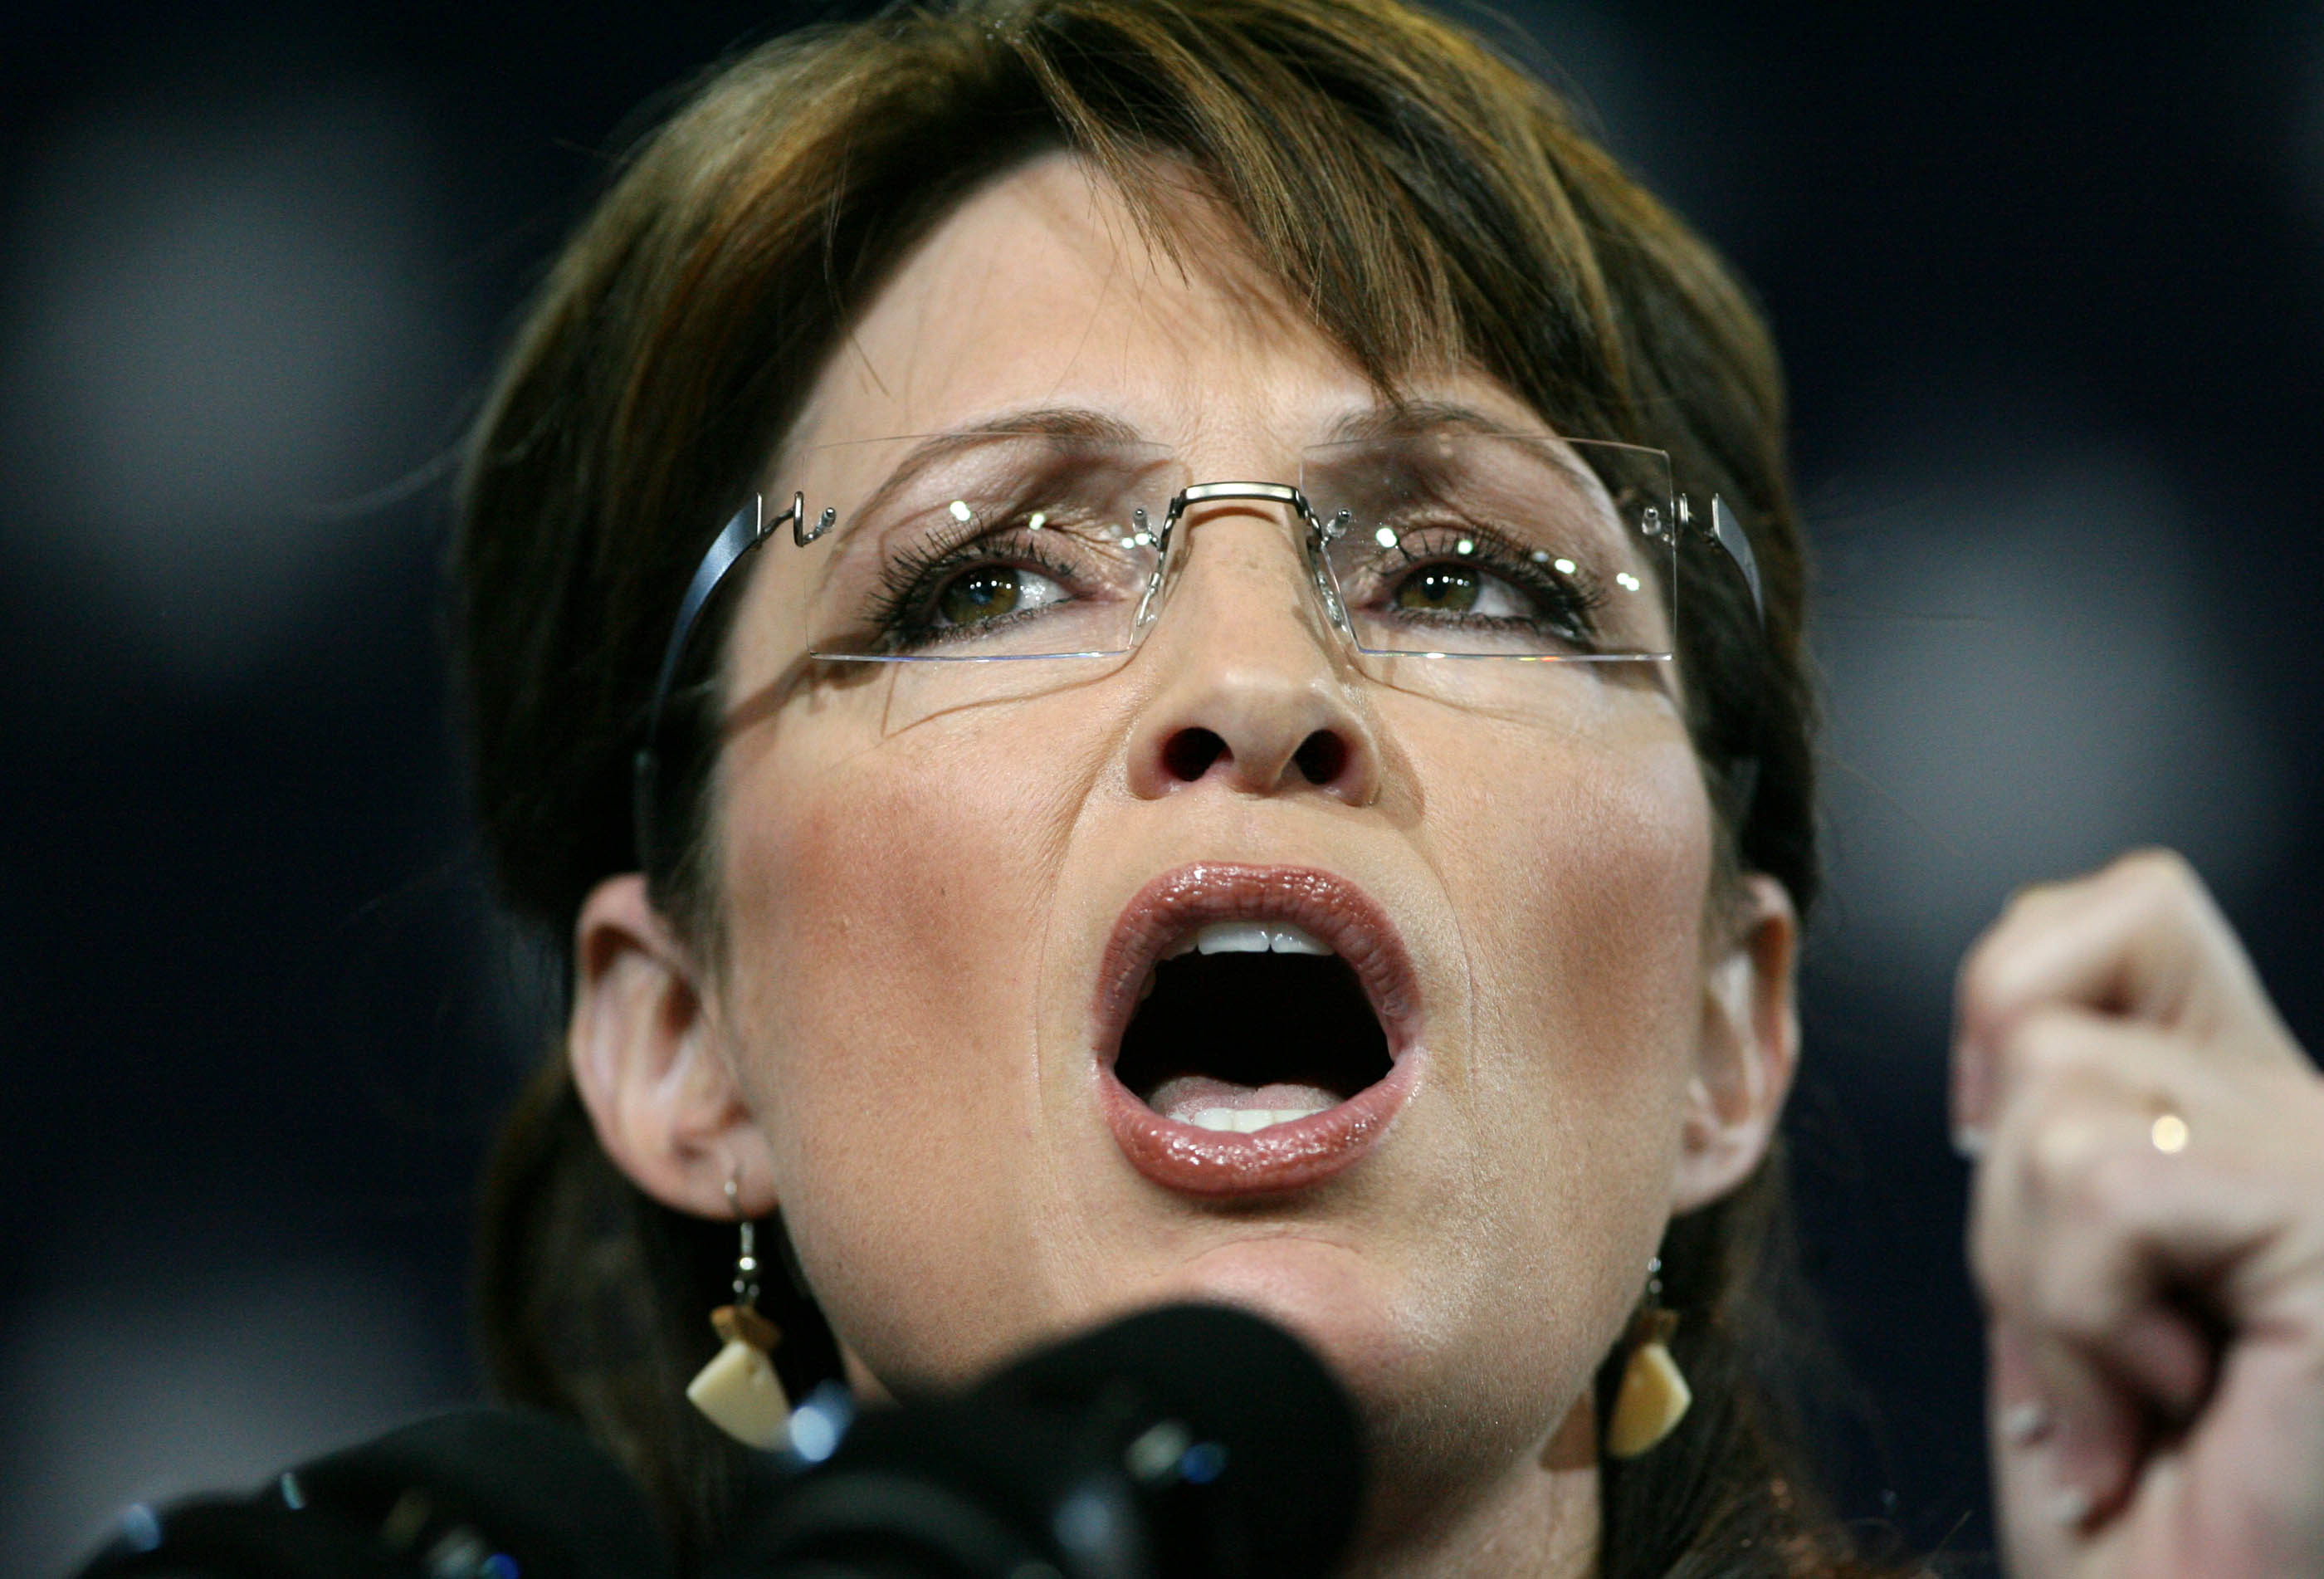 Governor Sarah Palin of Alaska, Senator John McCain's running mate as vice presidential for the 2008 United States presidential election, during a campaign rally, 2008.